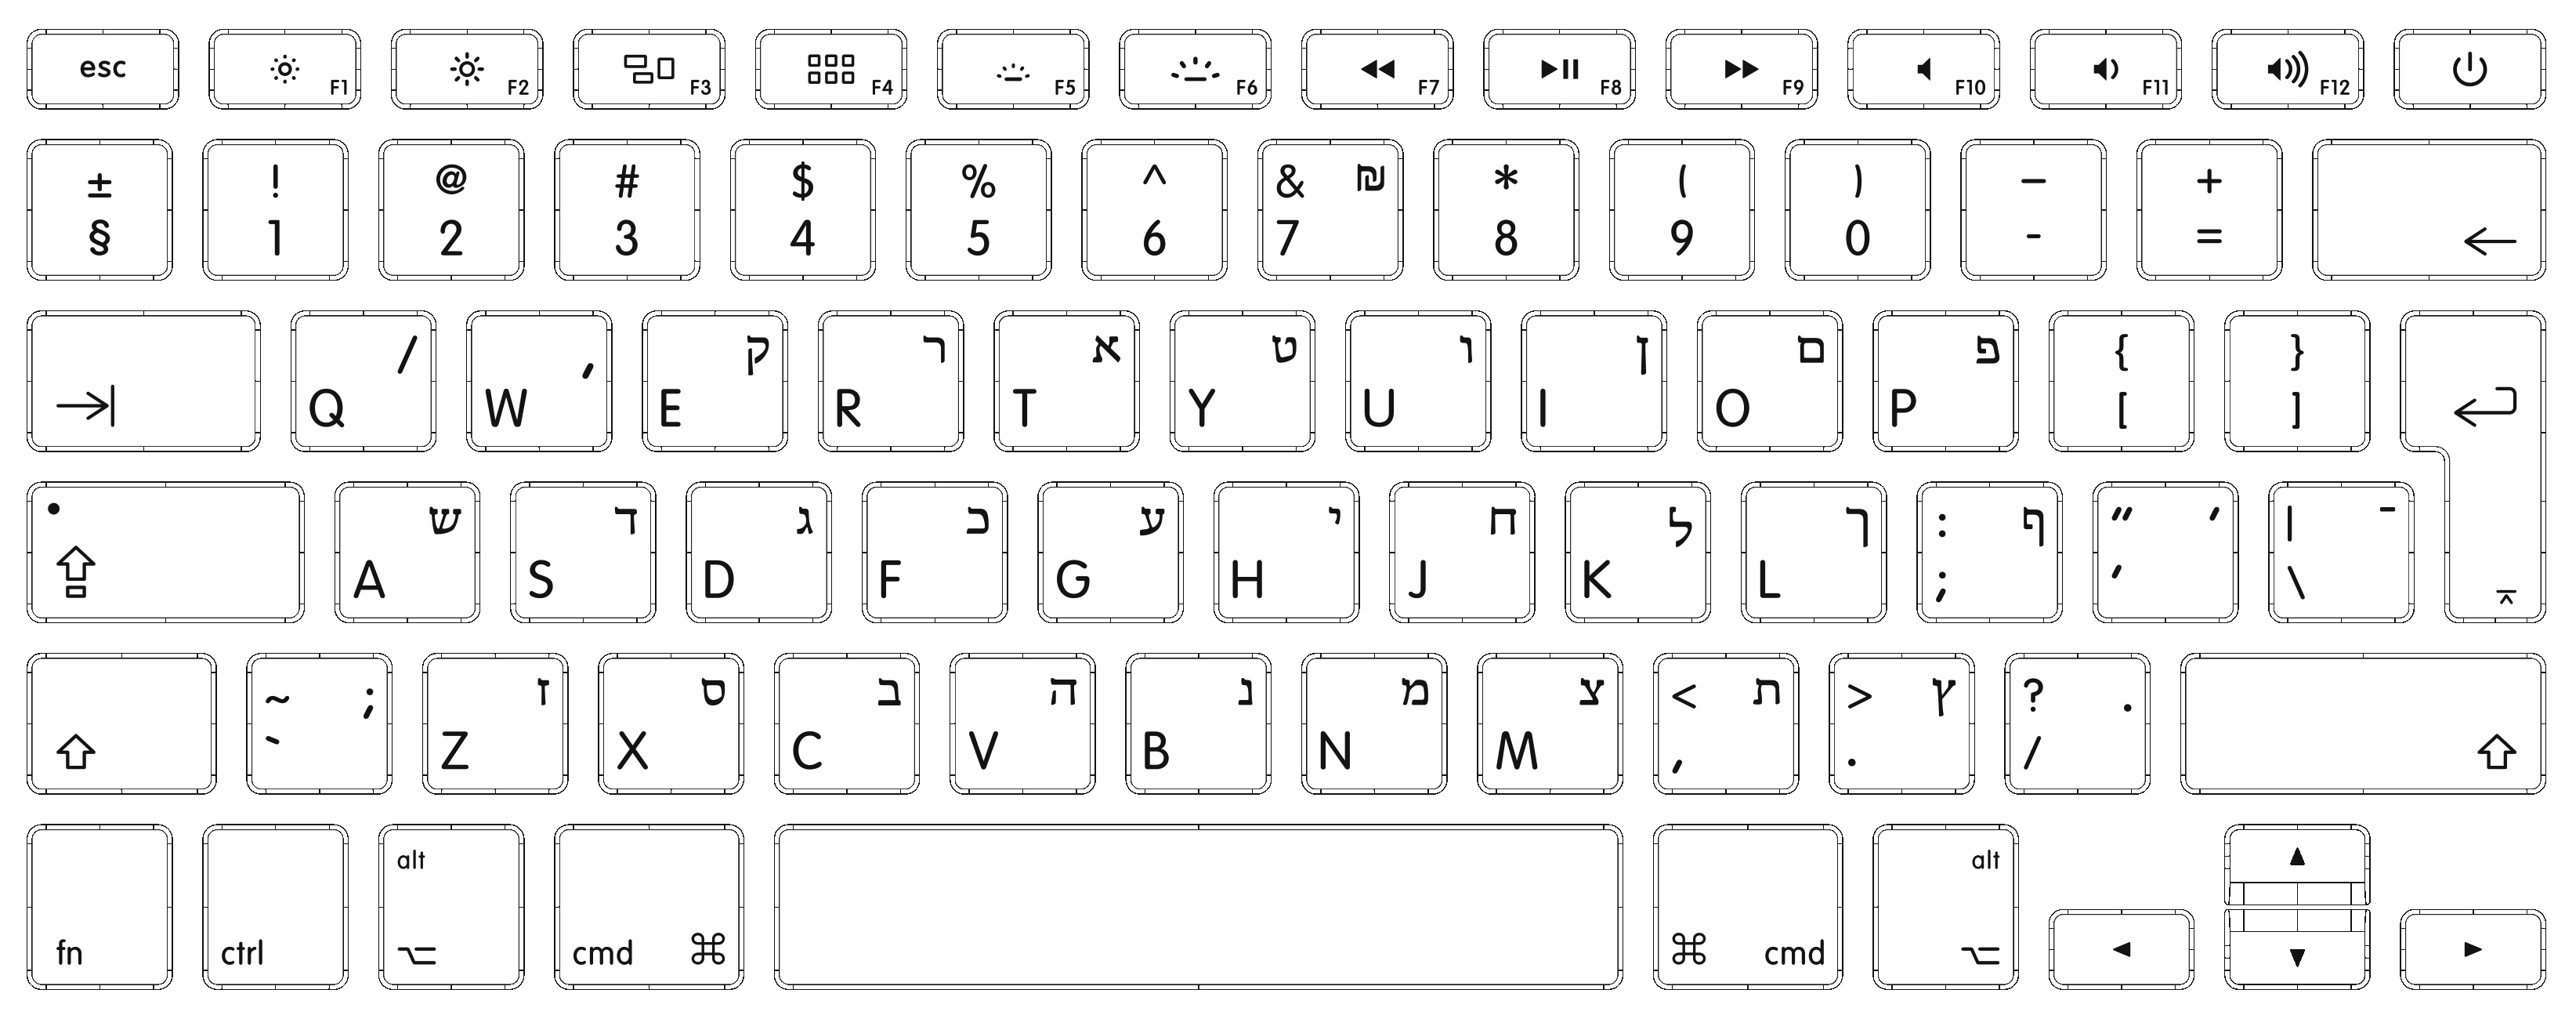 cleaning apple keyboard with numeric keypad